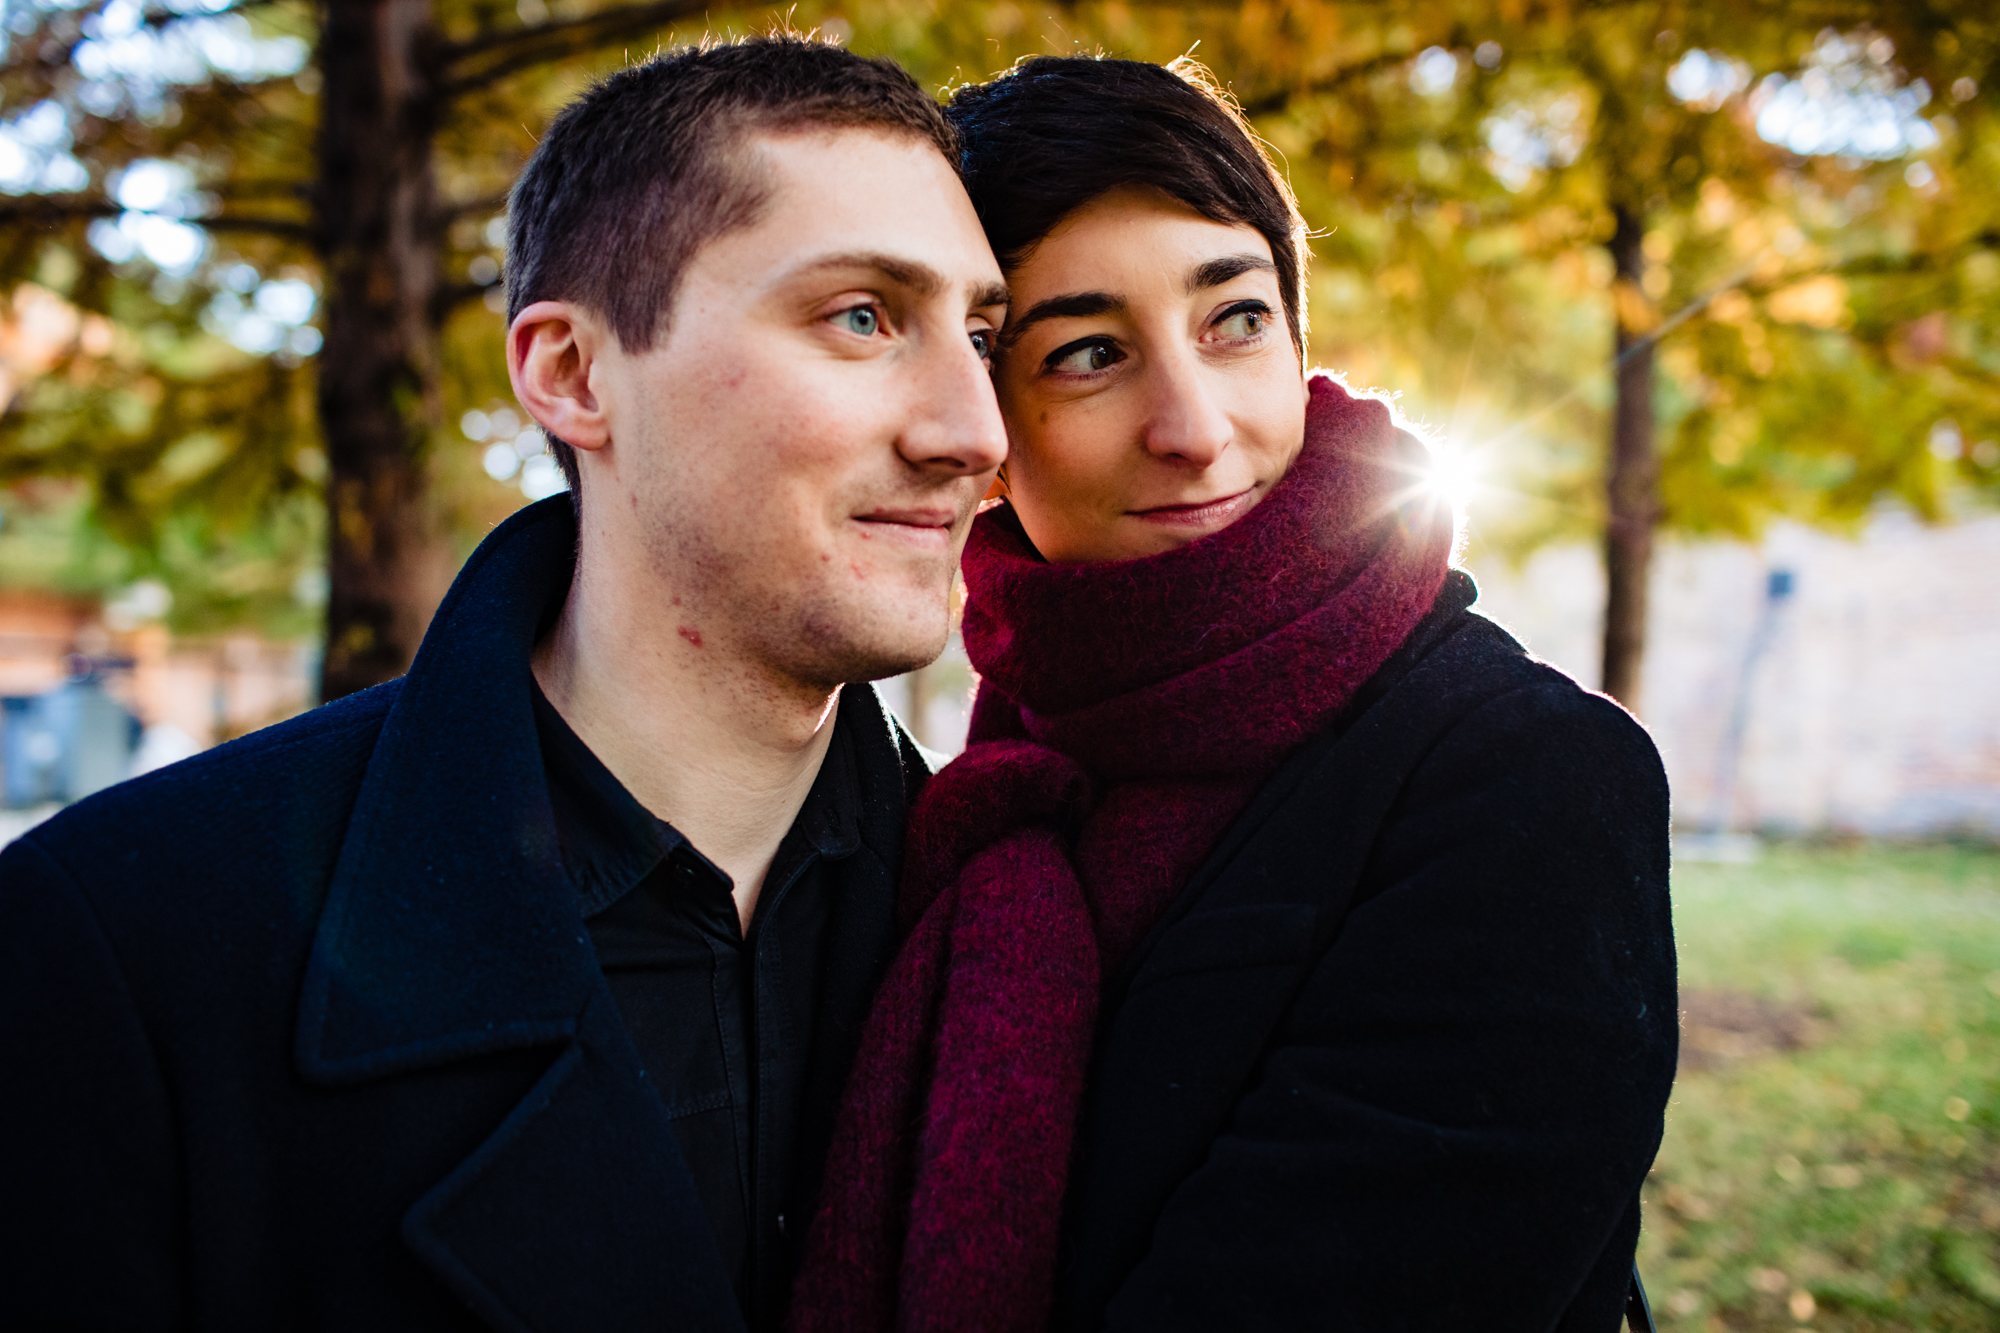 A couple smiles together during a Wicker Park engagement session.